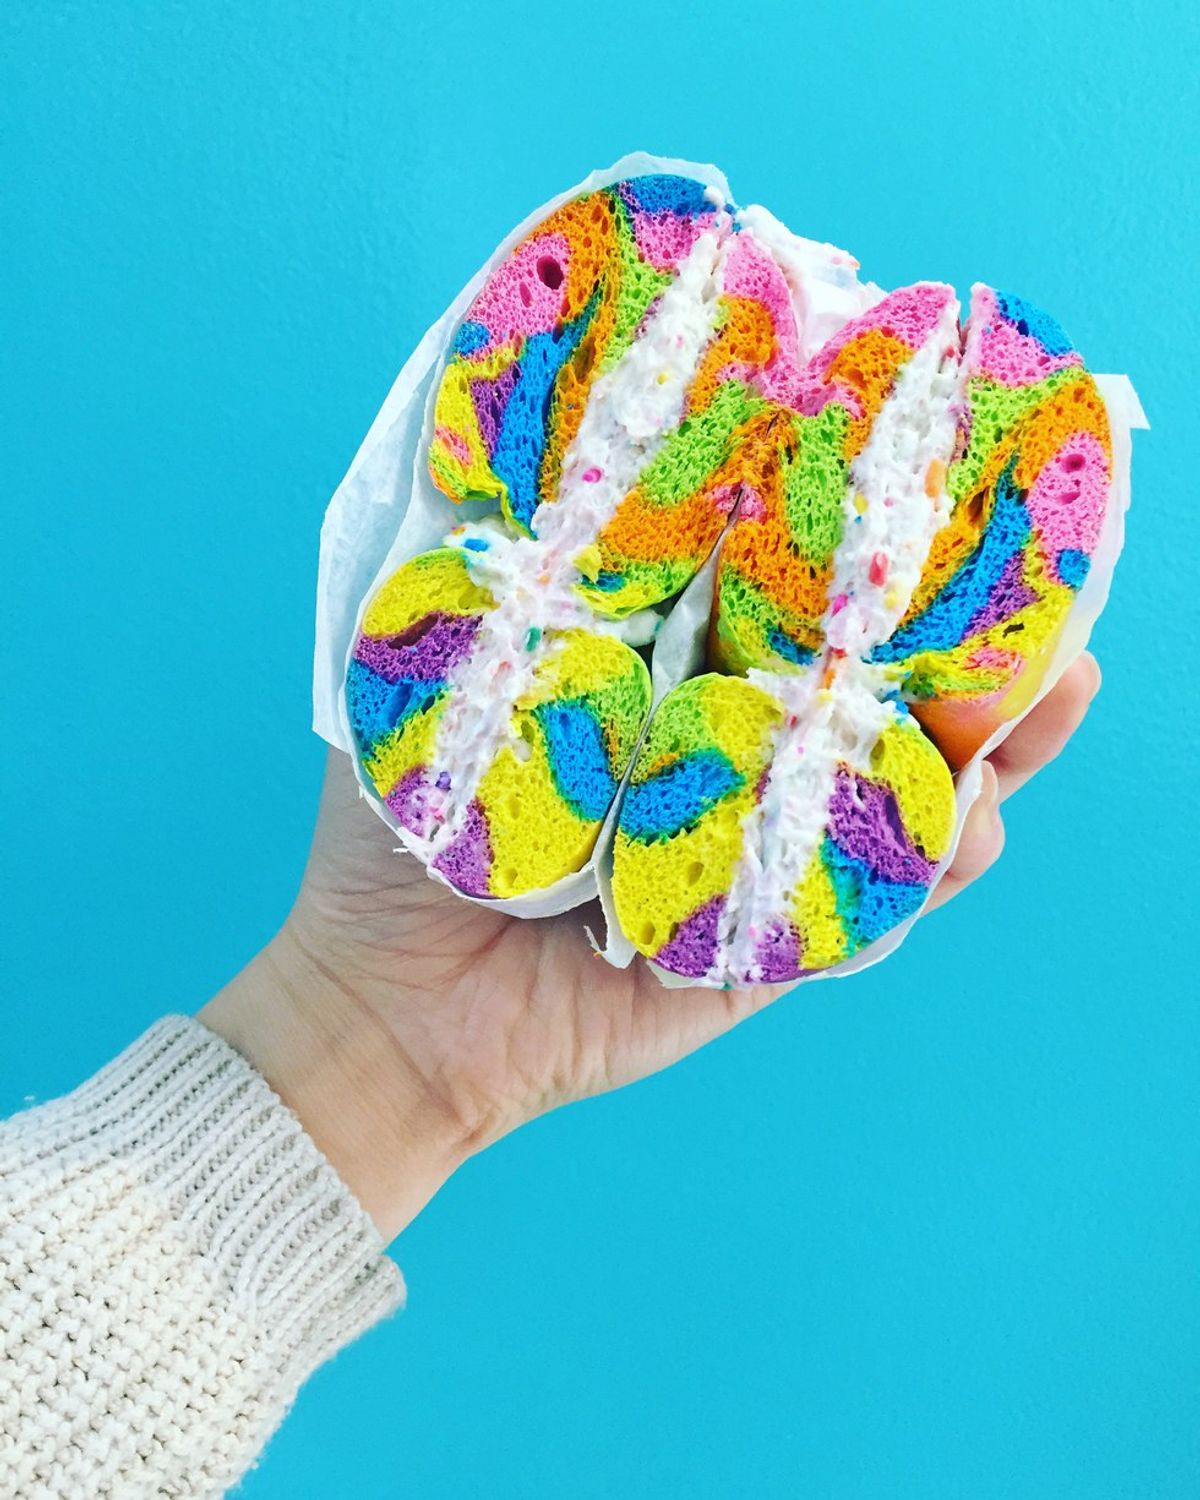 I Tried A Rainbow Bagel. Here's What Happened.